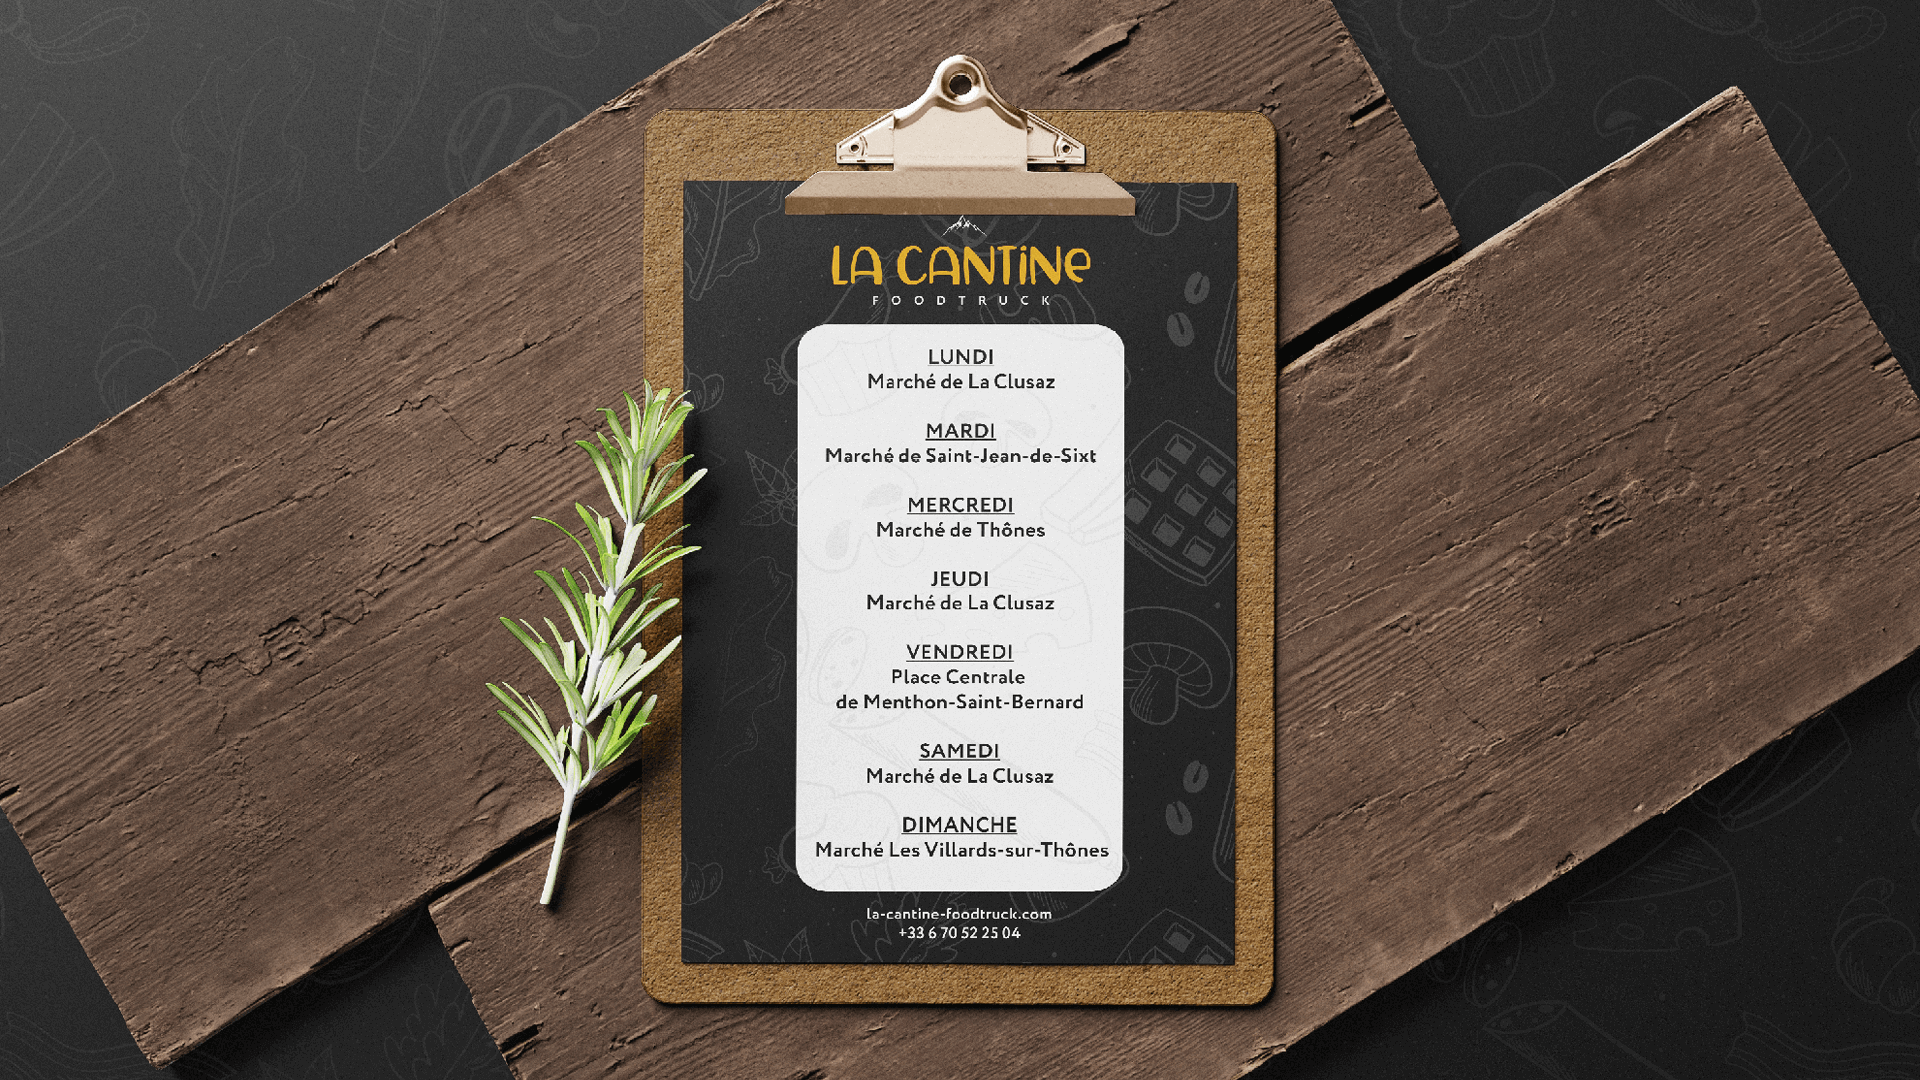 07.Cantine - Pres Behance.png